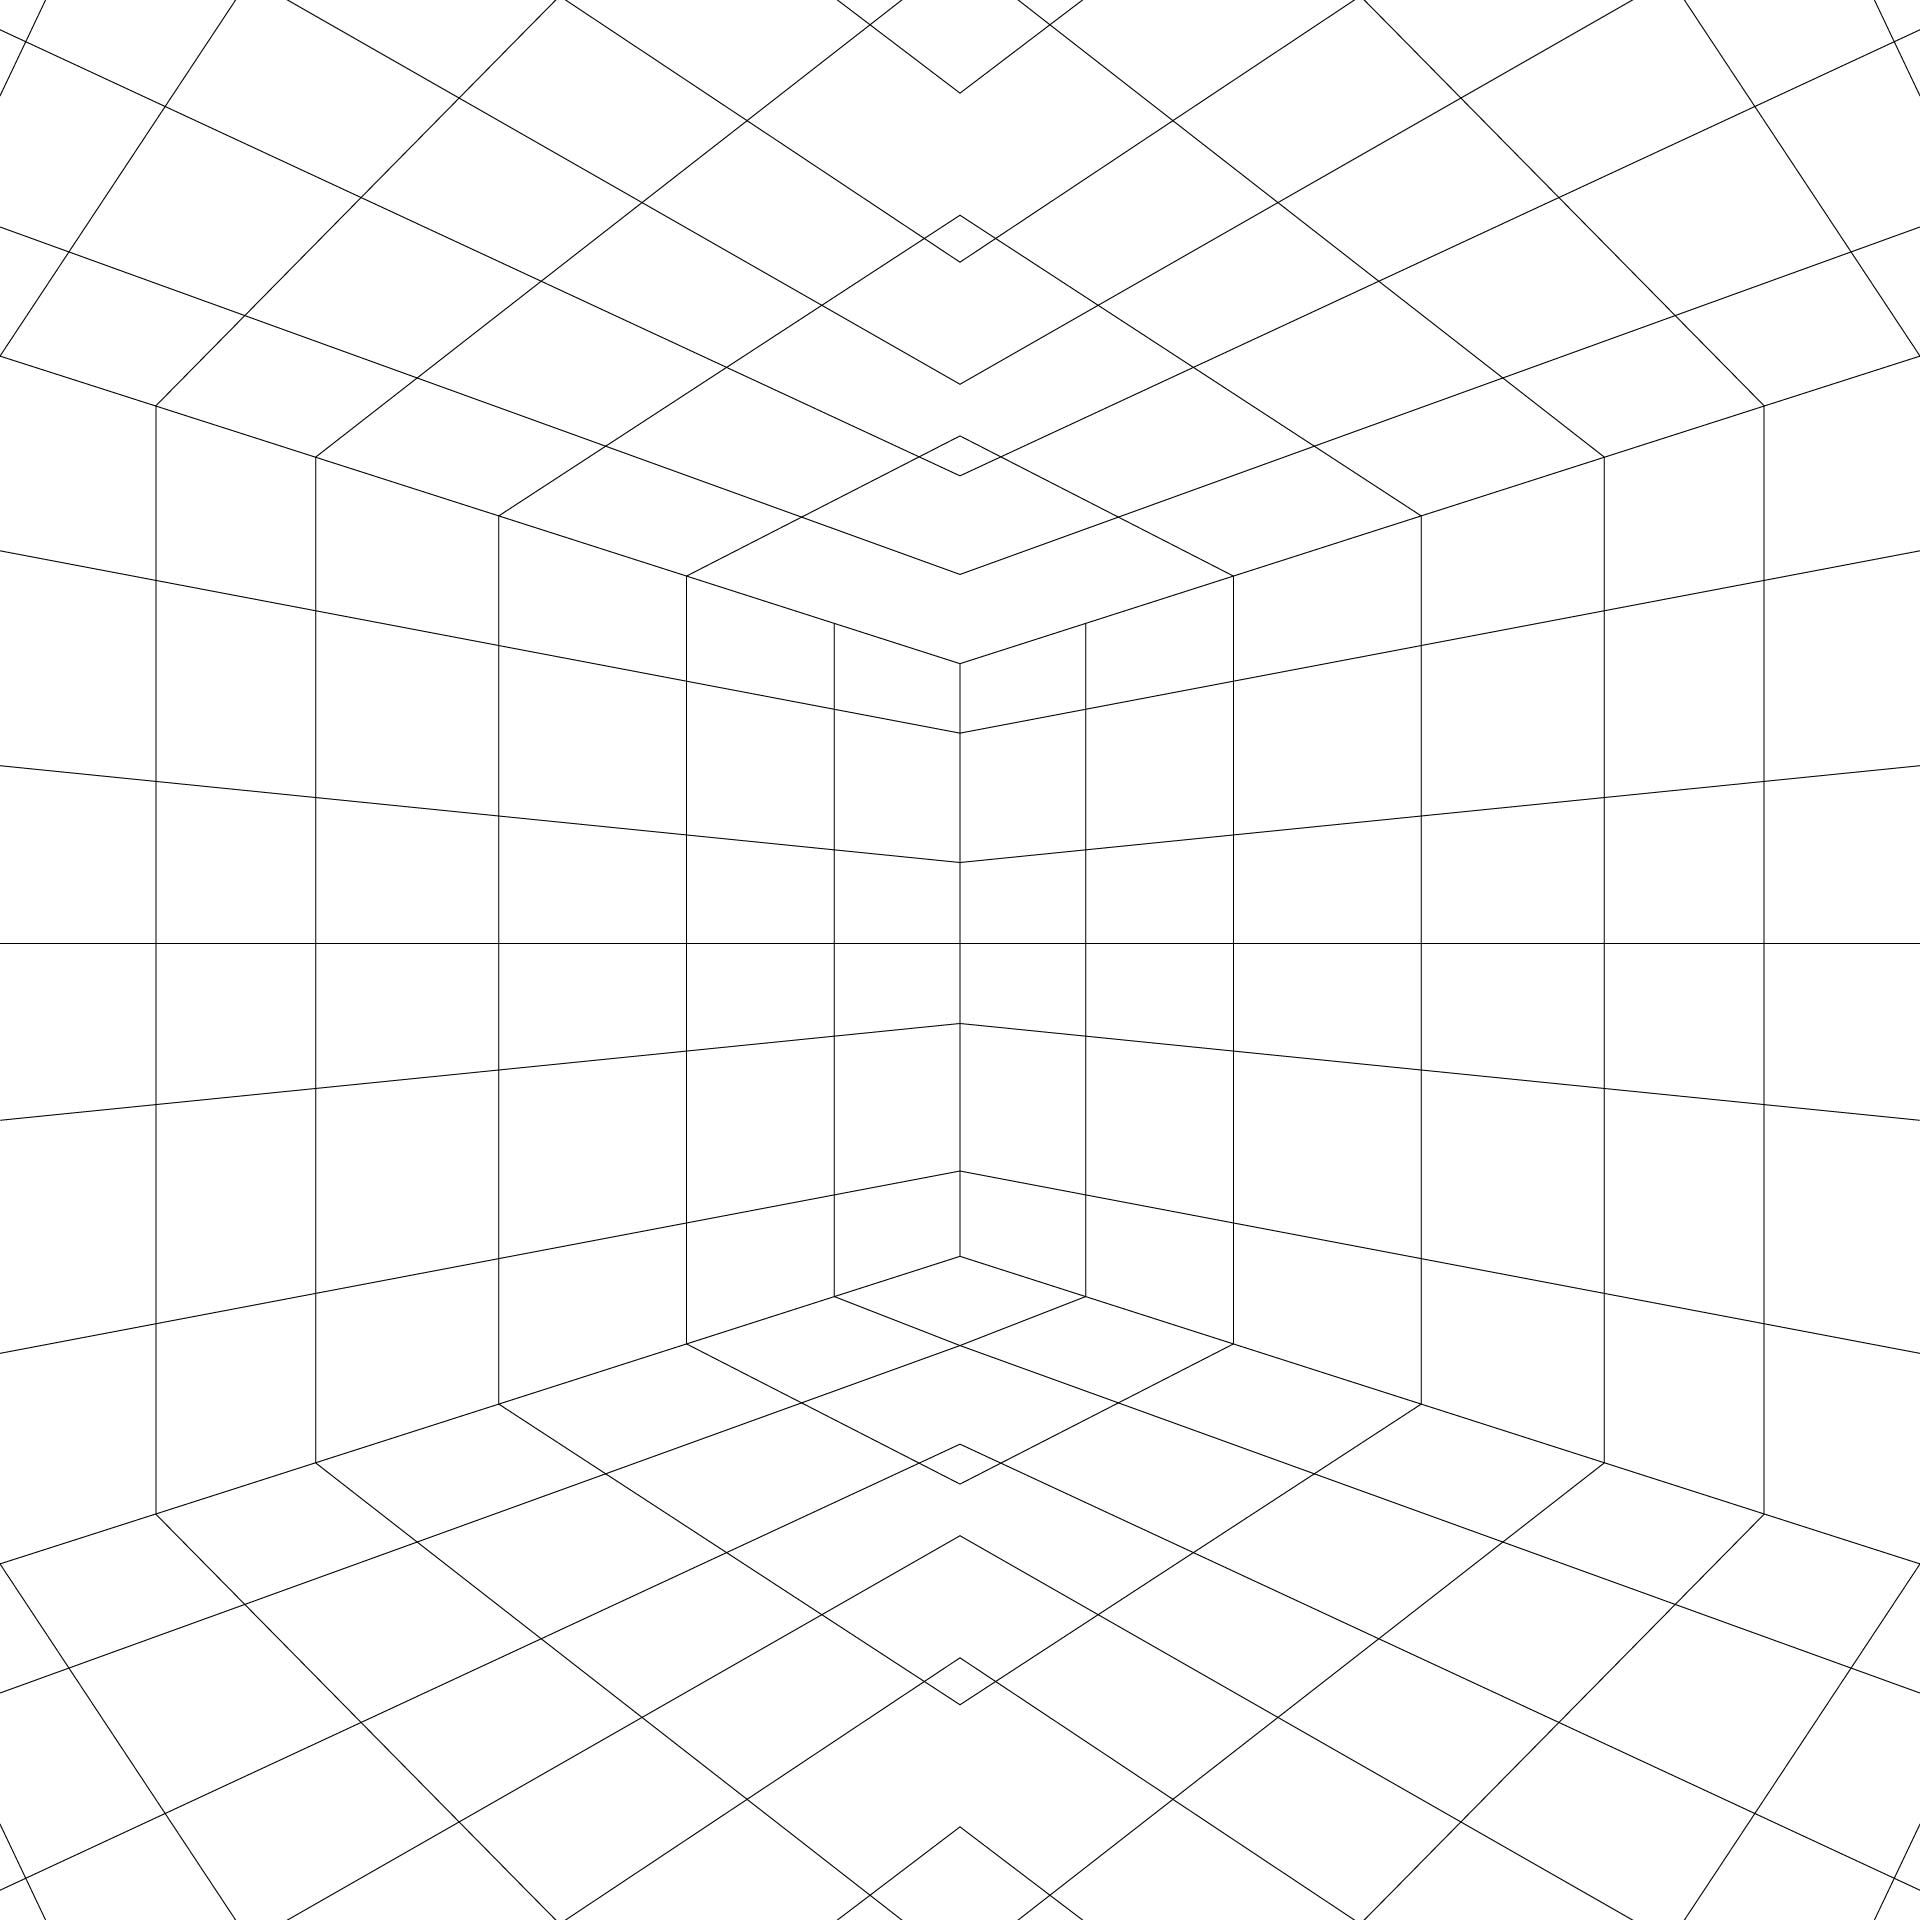 Two-Point Perspective Grid